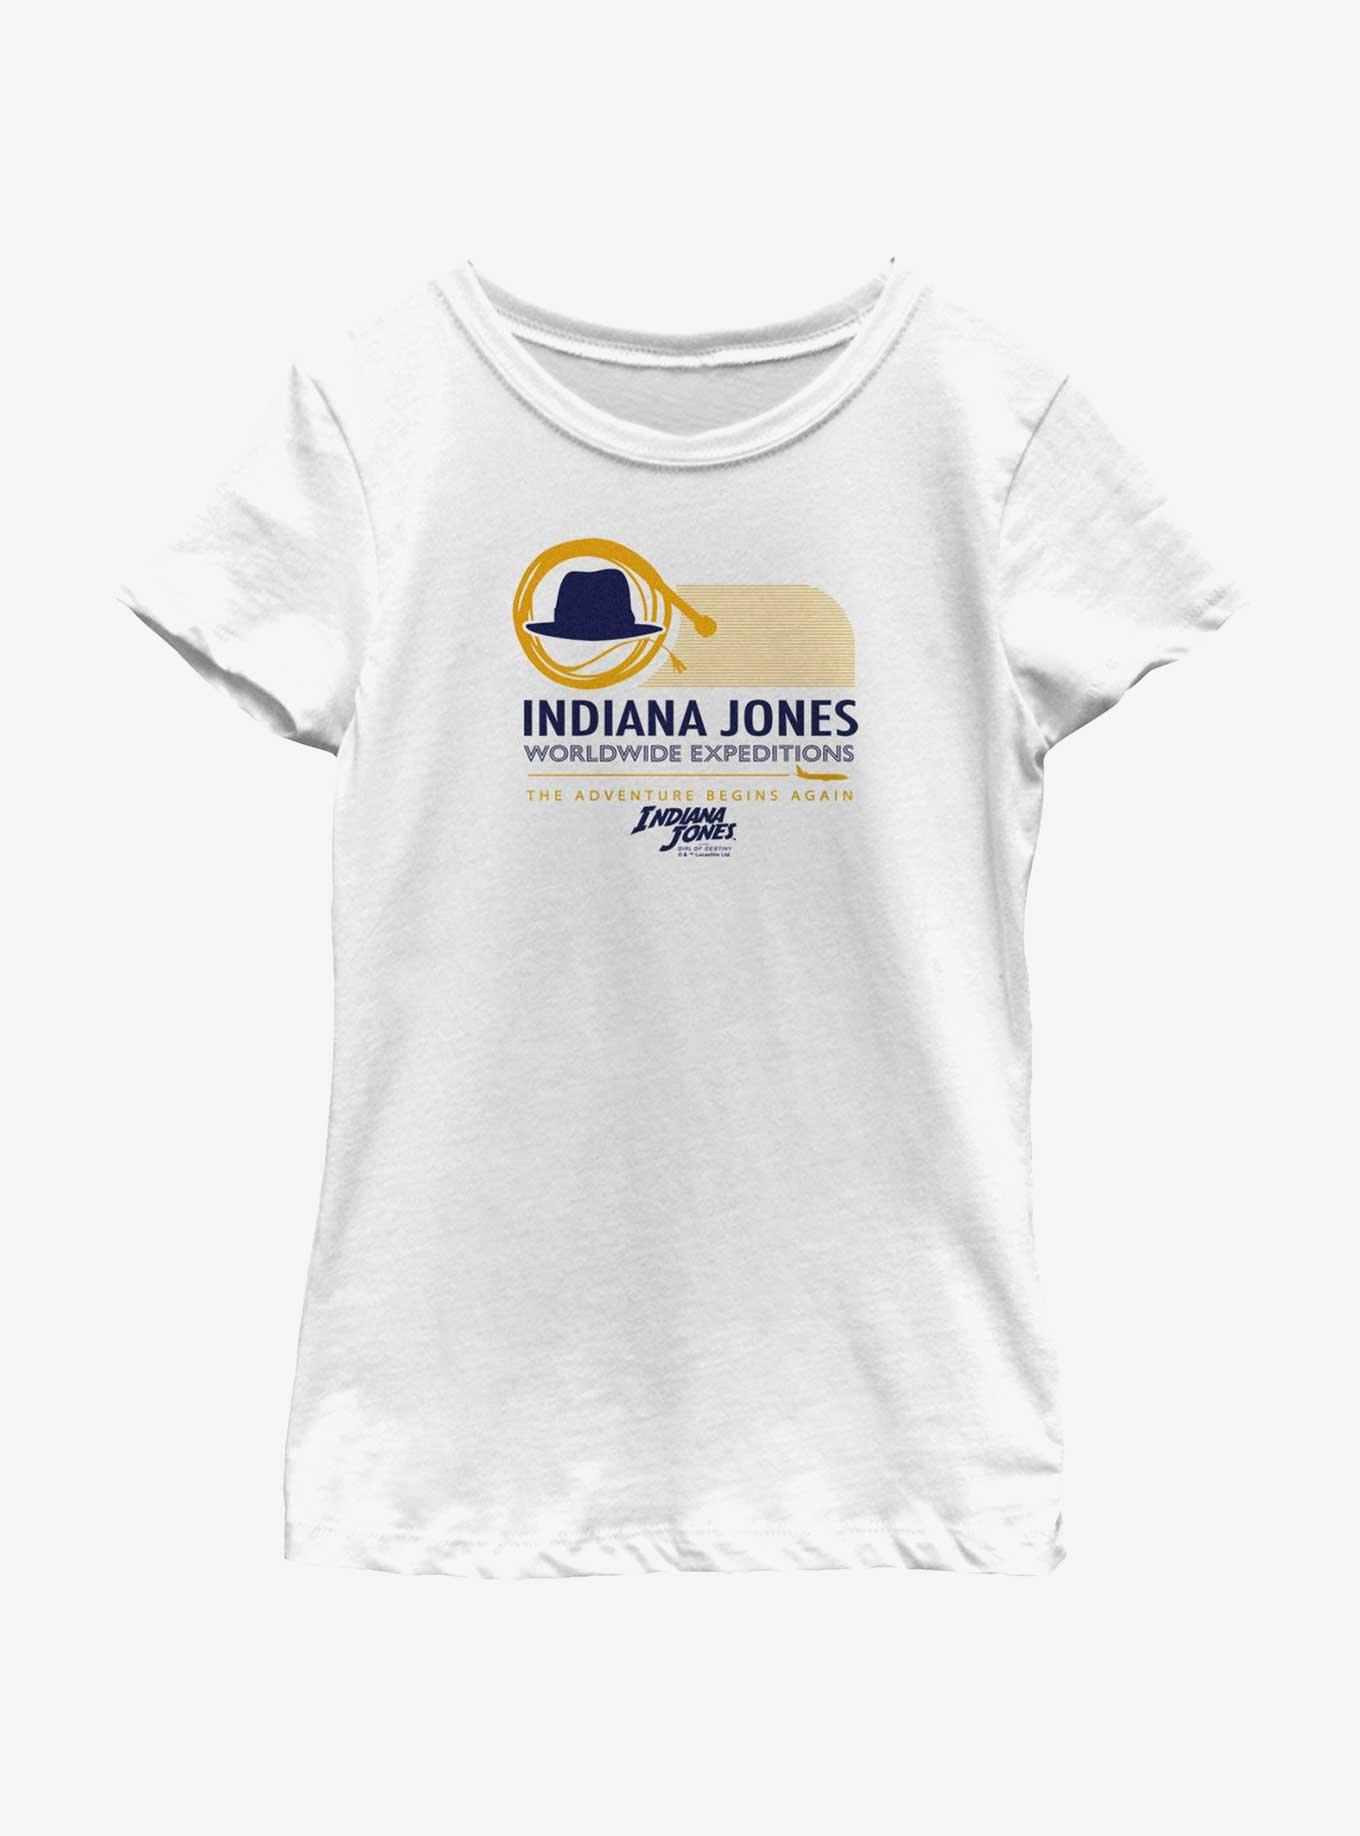 Indiana Jones and the Dial of Destiny Speedy Planes Girls Youth T-Shirt, WHITE, hi-res